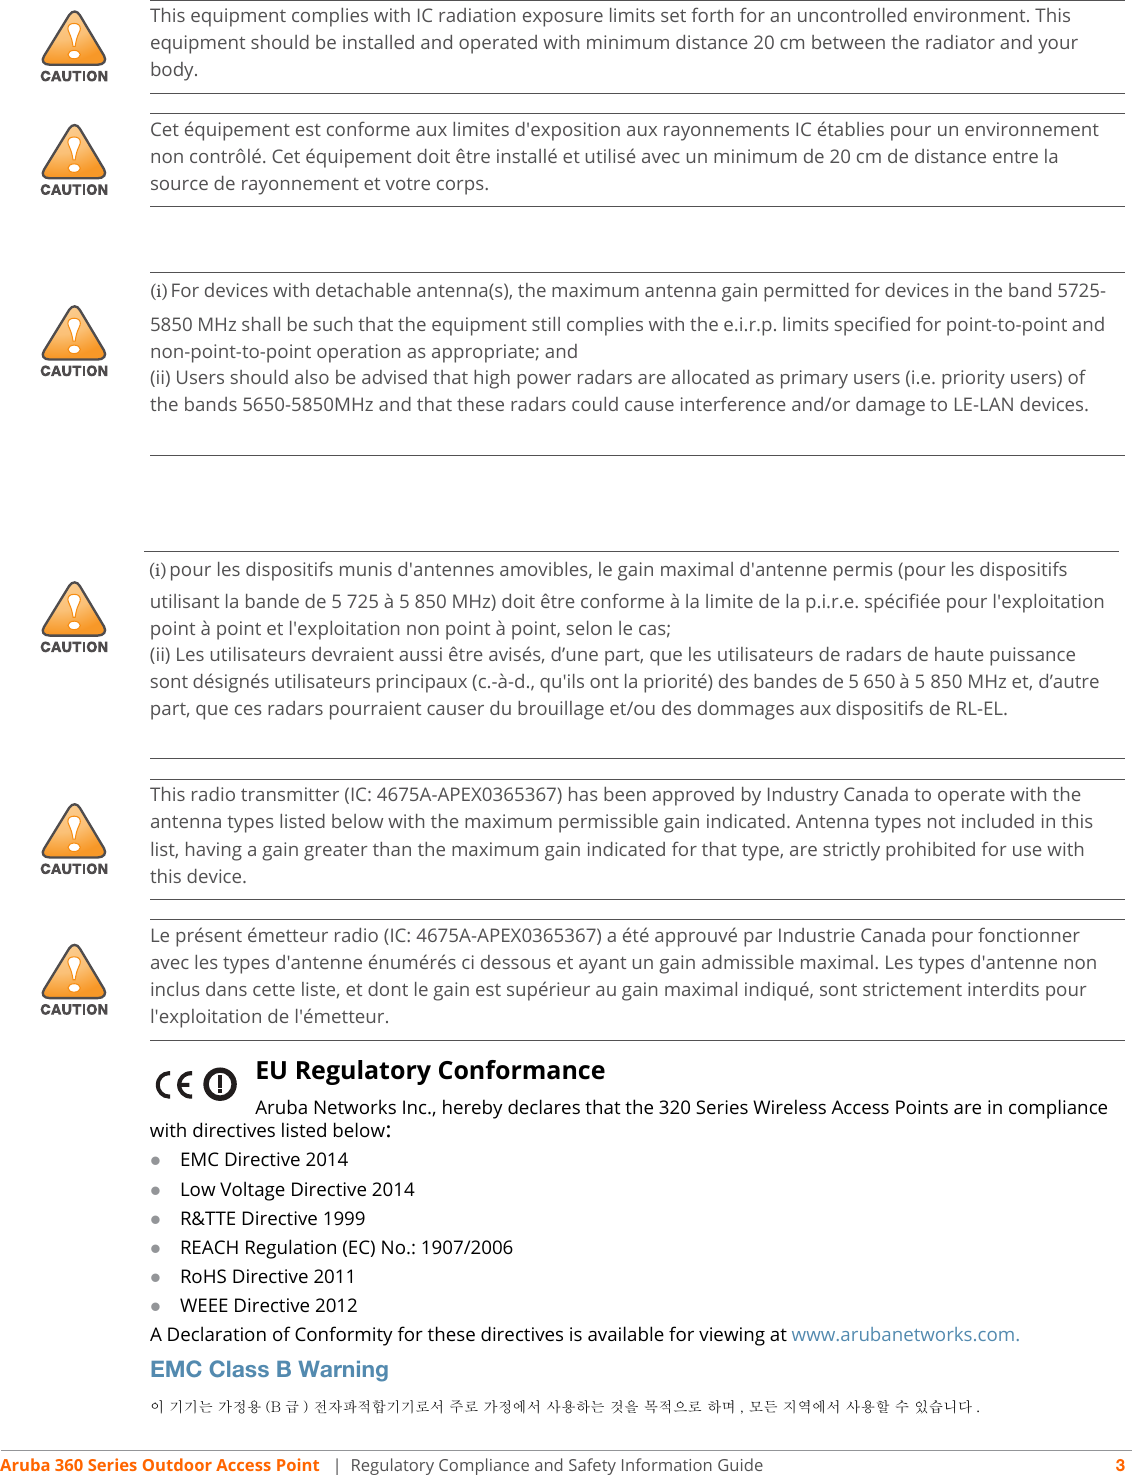 Aruba 360 Series Outdoor Access Point  | Regulatory Compliance and Safety Information Guide 3EU Regulatory Conformance Aruba Networks Inc., hereby declares that the 320 Series Wireless Access Points are in compliance with directives listed below:EMC Directive 2014Low Voltage Directive 2014R&amp;TTE Directive 1999REACH Regulation (EC) No.: 1907/2006RoHS Directive 2011WEEE Directive 2012A Declaration of Conformity for these directives is available for viewing at www.arubanetworks.com.EMC Class B Warning이 기기는 가정용 (B 급 ) 전자파적합기기로서 주로 가정에서 사용하는 것을 목적으로 하며 , 모든 지역에서 사용할 수 있습니다 .!This equipment complies with IC radiation exposure limits set forth for an uncontrolled environment. This equipment should be installed and operated with minimum distance 20 cm between the radiator and your body.!Cet équipement est conforme aux limites d&apos;exposition aux rayonnements IC établies pour un environnement non contrôlé. Cet équipement doit être installé et utilisé avec un minimum de 20 cm de distance entre la source de rayonnement et votre corps.!(i) For devices with detachable antenna(s), the maximum antenna gain permitted for devices in the band 5725-5850 MHz shall be such that the equipment still complies with the e.i.r.p. limits specified for point-to-point and non-point-to-point operation as appropriate; and(ii) Users should also be advised that high power radars are allocated as primary users (i.e. priority users) of the bands 5650-5850MHz and that these radars could cause interference and/or damage to LE-LAN devices.!(i) pour les dispositifs munis d&apos;antennes amovibles, le gain maximal d&apos;antenne permis (pour les dispositifsutilisant la bande de 5 725 à 5 850 MHz) doit être conforme à la limite de la p.i.r.e. spécifiée pour l&apos;exploitation point à point et l&apos;exploitation non point à point, selon le cas;(ii) Les utilisateurs devraient aussi être avisés, d’une part, que les utilisateurs de radars de haute puissance sont désignés utilisateurs principaux (c.-à-d., qu&apos;ils ont la priorité) des bandes de 5 650 à 5 850 MHz et, d’autre part, que ces radars pourraient causer du brouillage et/ou des dommages aux dispositifs de RL-EL.!This radio transmitter (IC: 4675A-APEX0365367) has been approved by Industry Canada to operate with the antenna types listed below with the maximum permissible gain indicated. Antenna types not included in this list, having a gain greater than the maximum gain indicated for that type, are strictly prohibited for use with this device.!Le présent émetteur radio (IC: 4675A-APEX0365367) a été approuvé par Industrie Canada pour fonctionner avec les types d&apos;antenne énumérés ci dessous et ayant un gain admissible maximal. Les types d&apos;antenne non inclus dans cette liste, et dont le gain est supérieur au gain maximal indiqué, sont strictement interdits pour l&apos;exploitation de l&apos;émetteur.